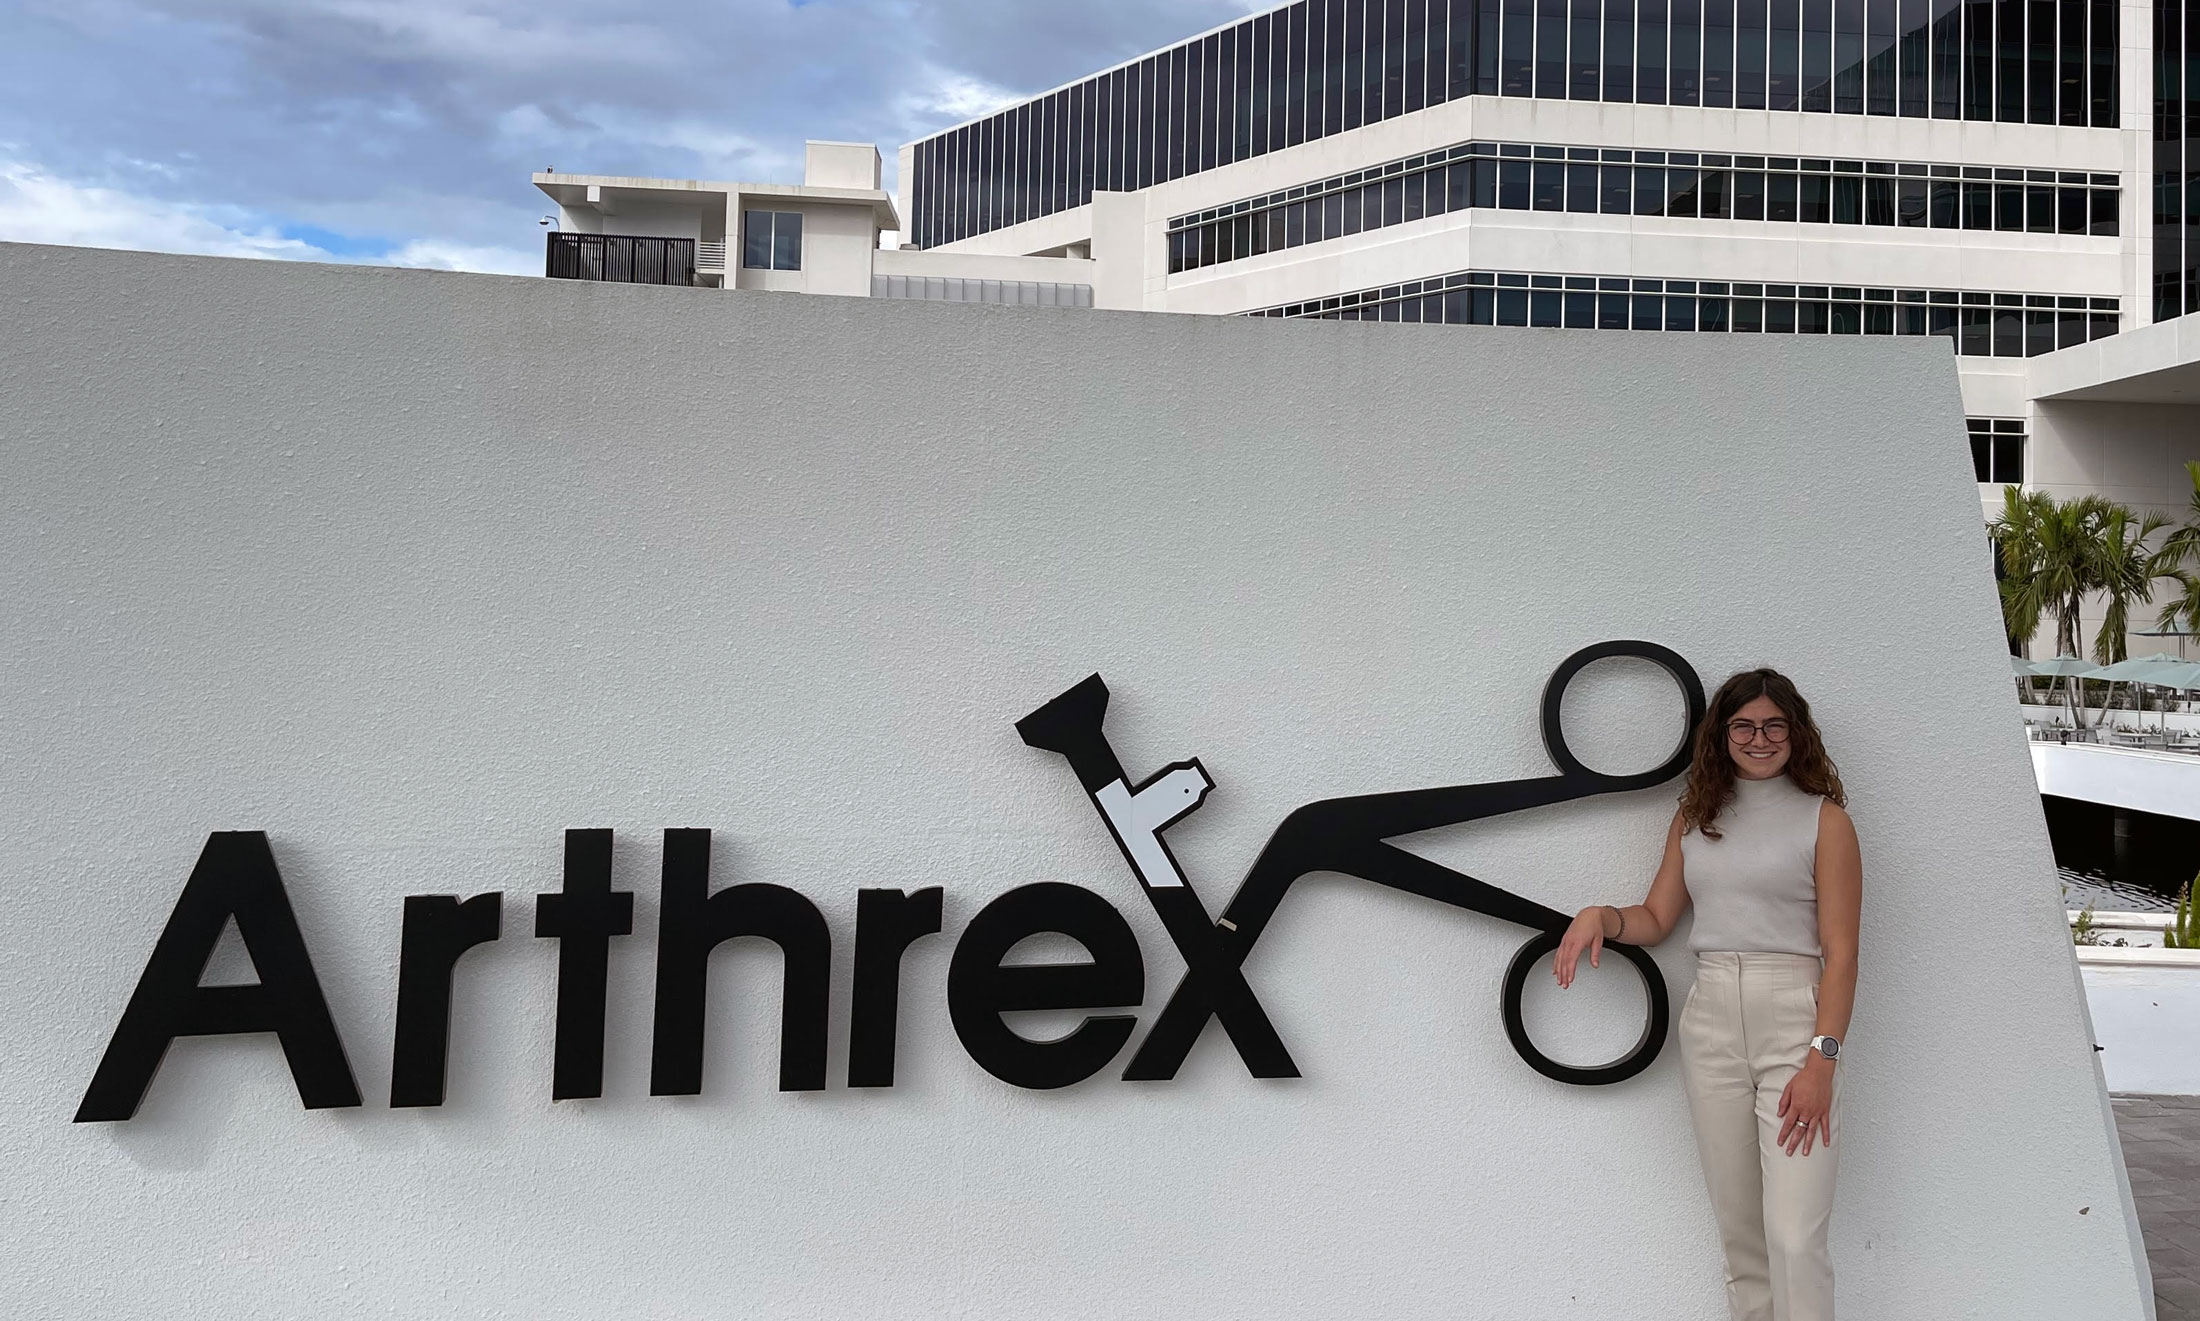 Chelsea Reeves stands with the Arthrex sign.